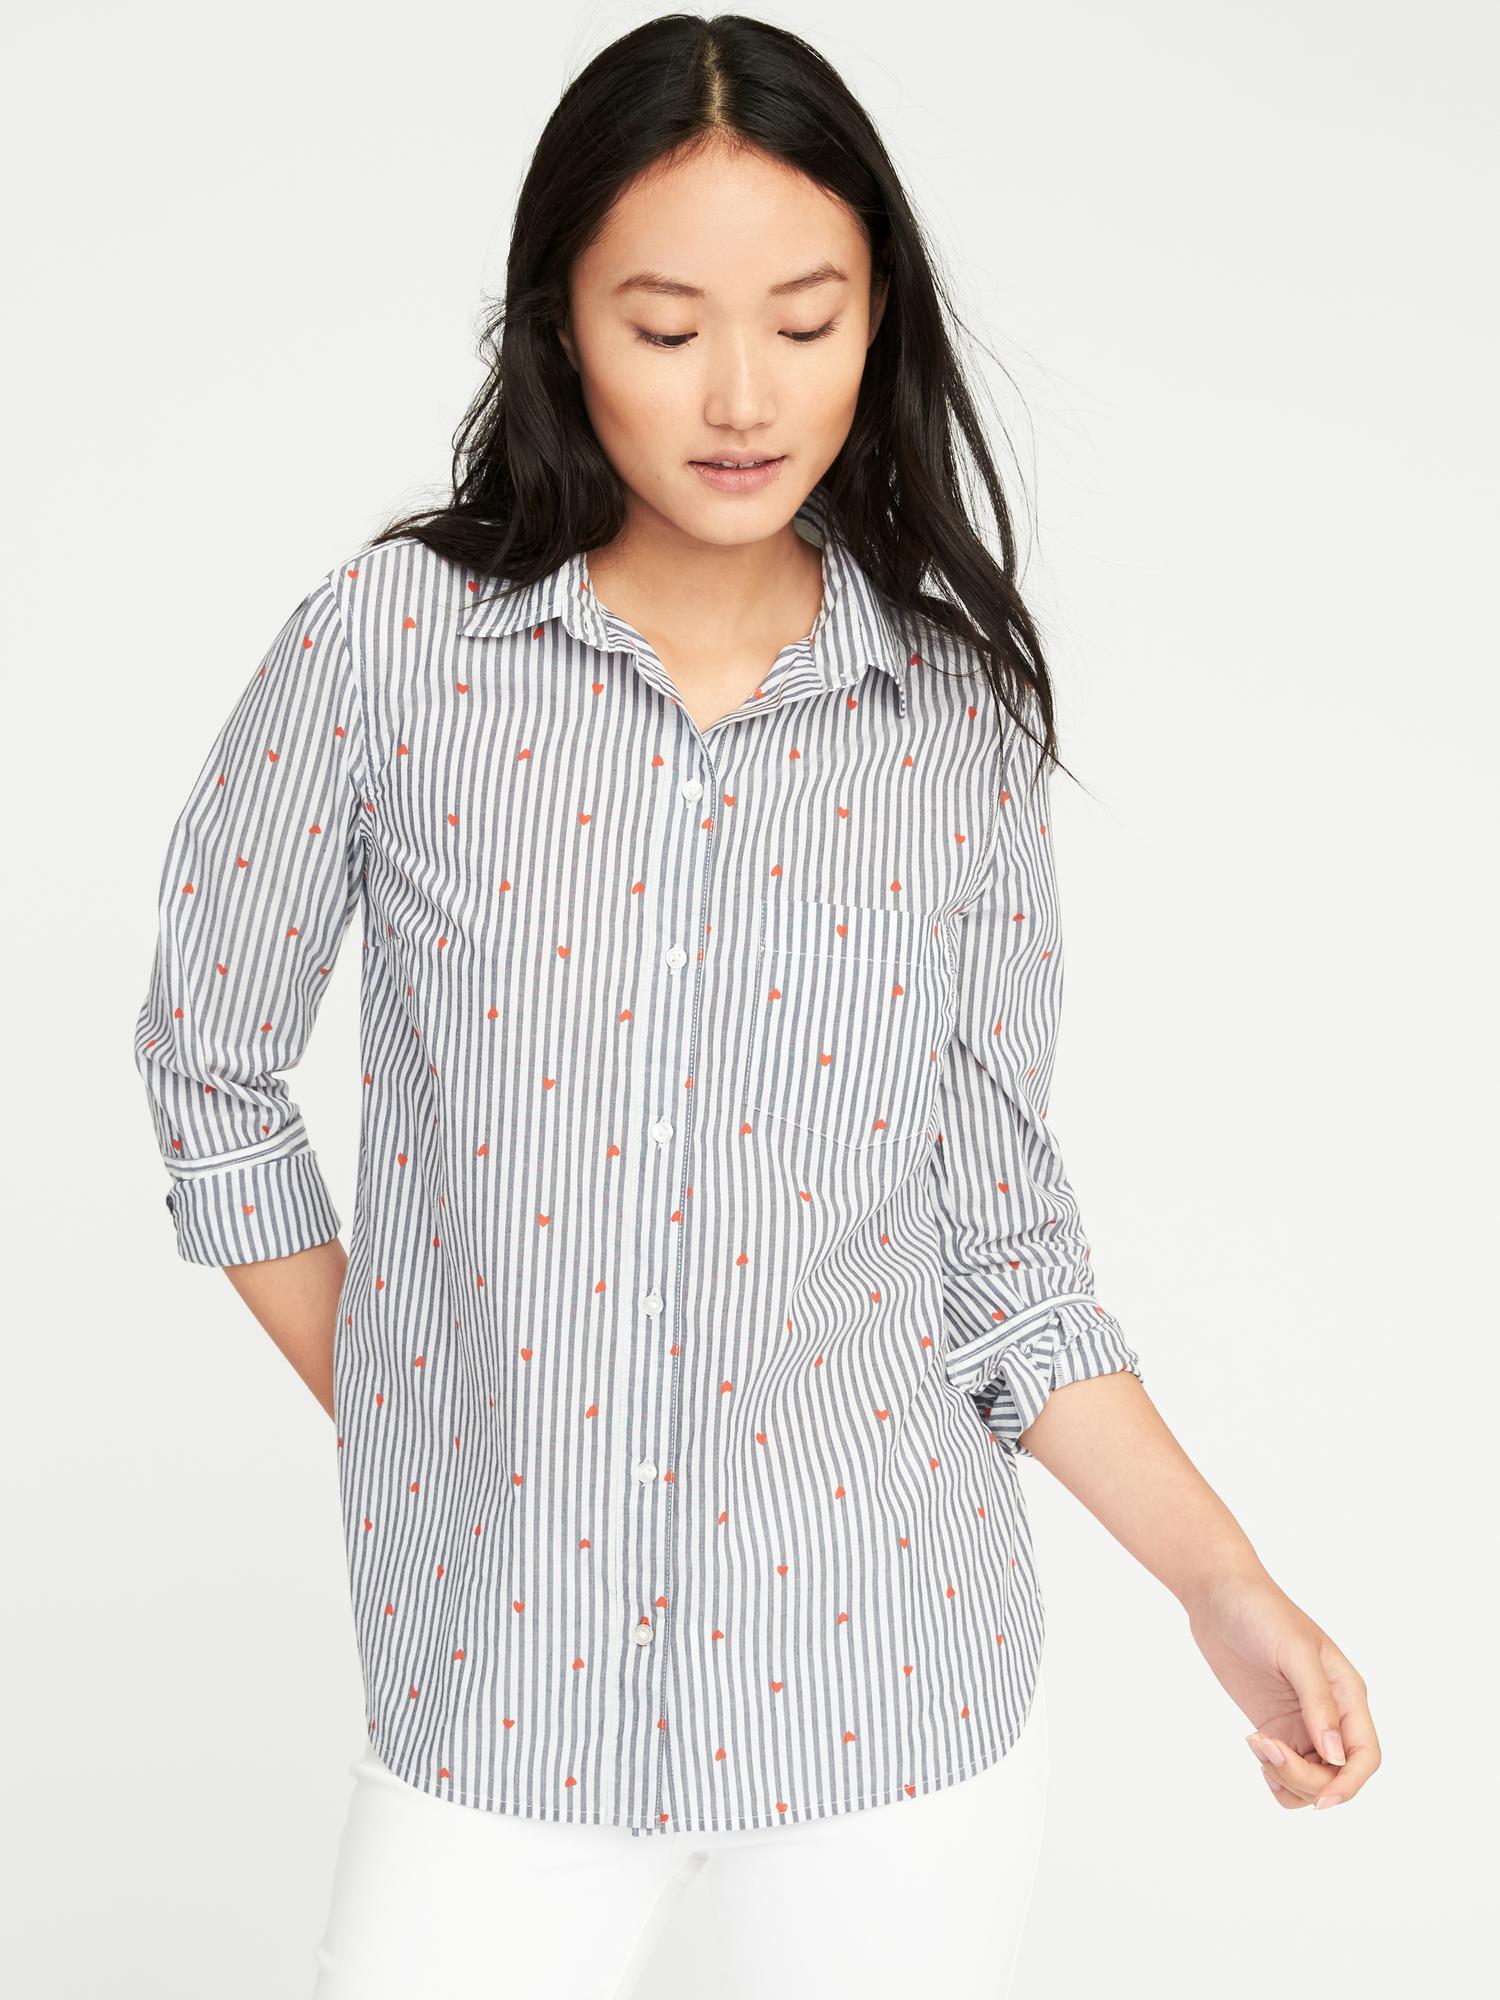 Relaxed Classic Printed Shirt for Women | Old Navy